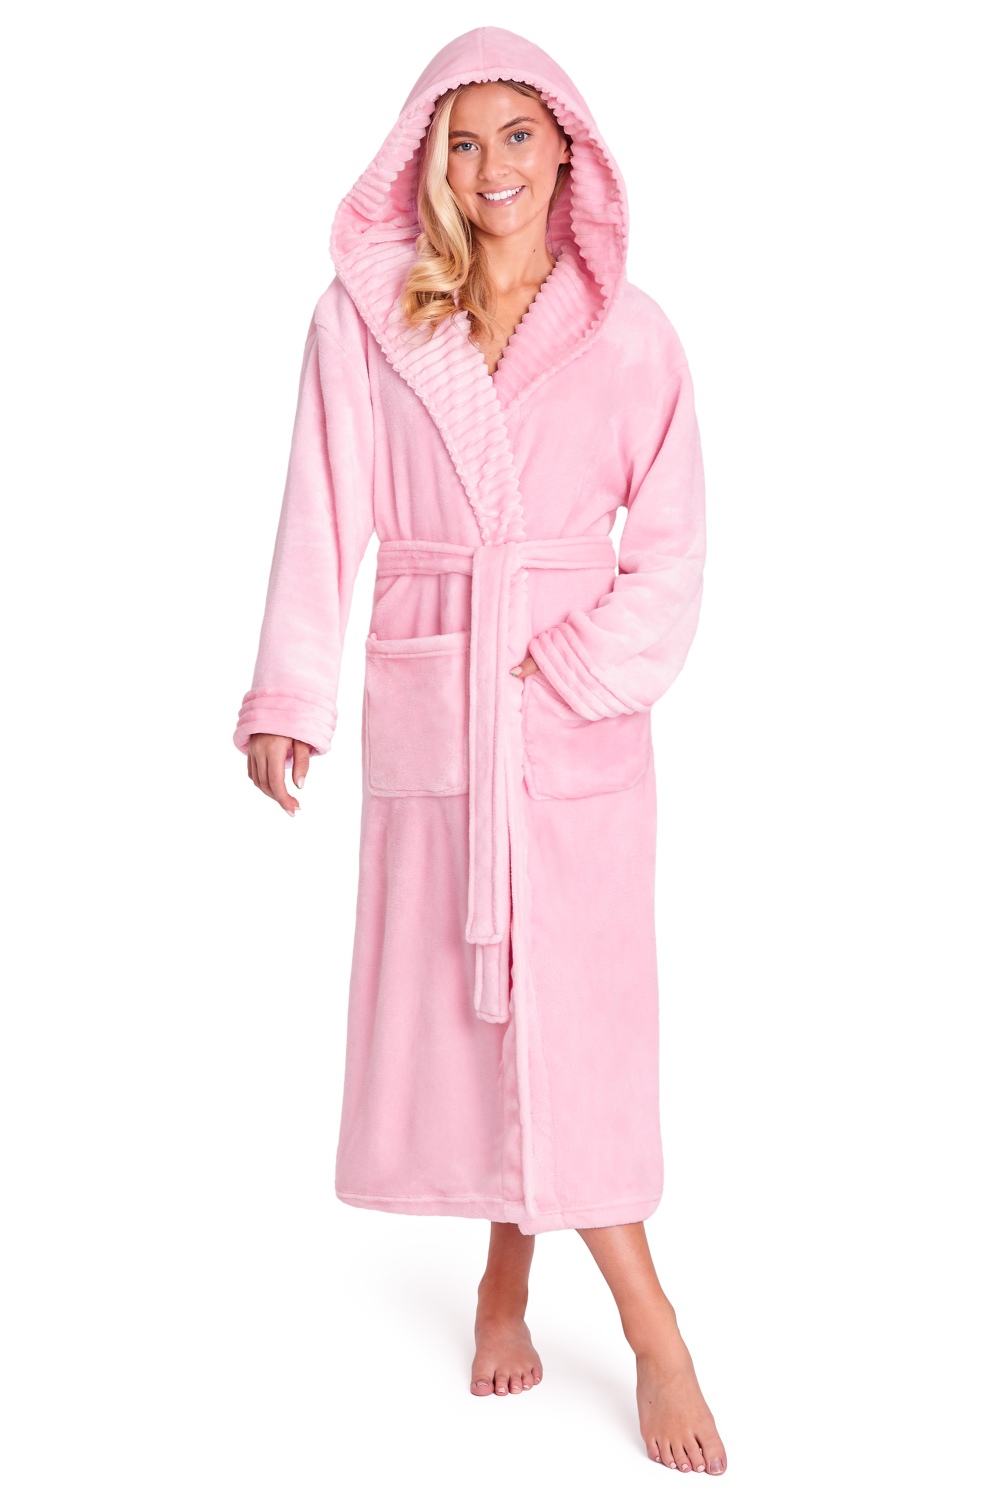 Catalonia Womens Chenille Fleece Robe Blanket, Long Dressing Gown Bathrobe  with Two Convenient Pockets and Belted Housecoat Sleepwear for Ladies,  Machine Washable, LARGE,GRAY - Walmart.com